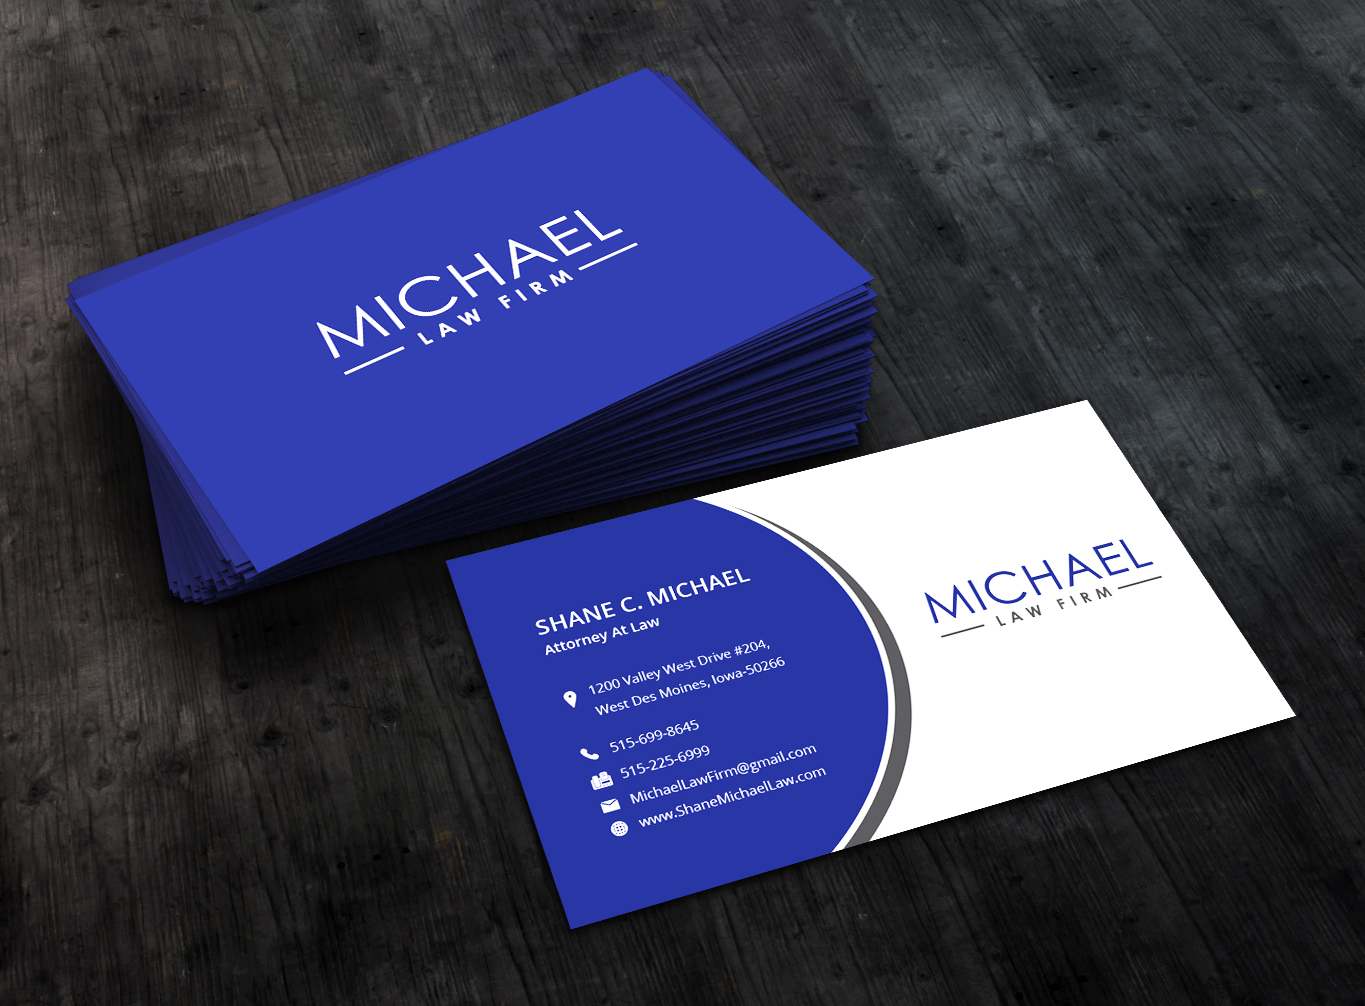 How to create good business cards, digital vs print business card